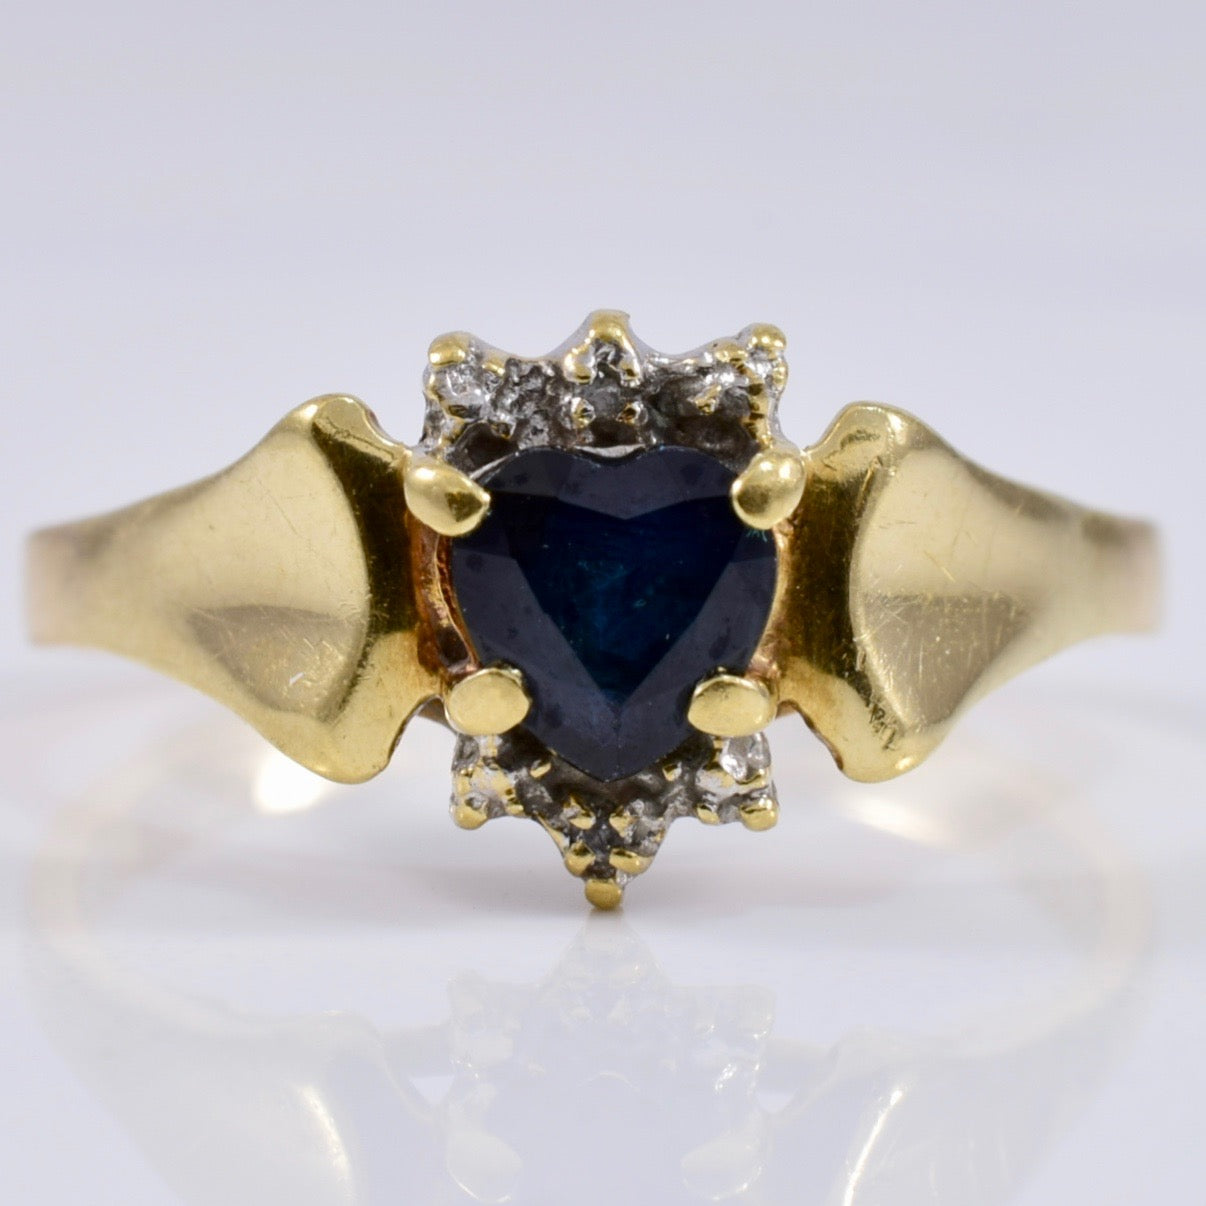 Heart Cut Sapphire Ring with Diamond Accents | 0.01 ctw SZ 6.75 |